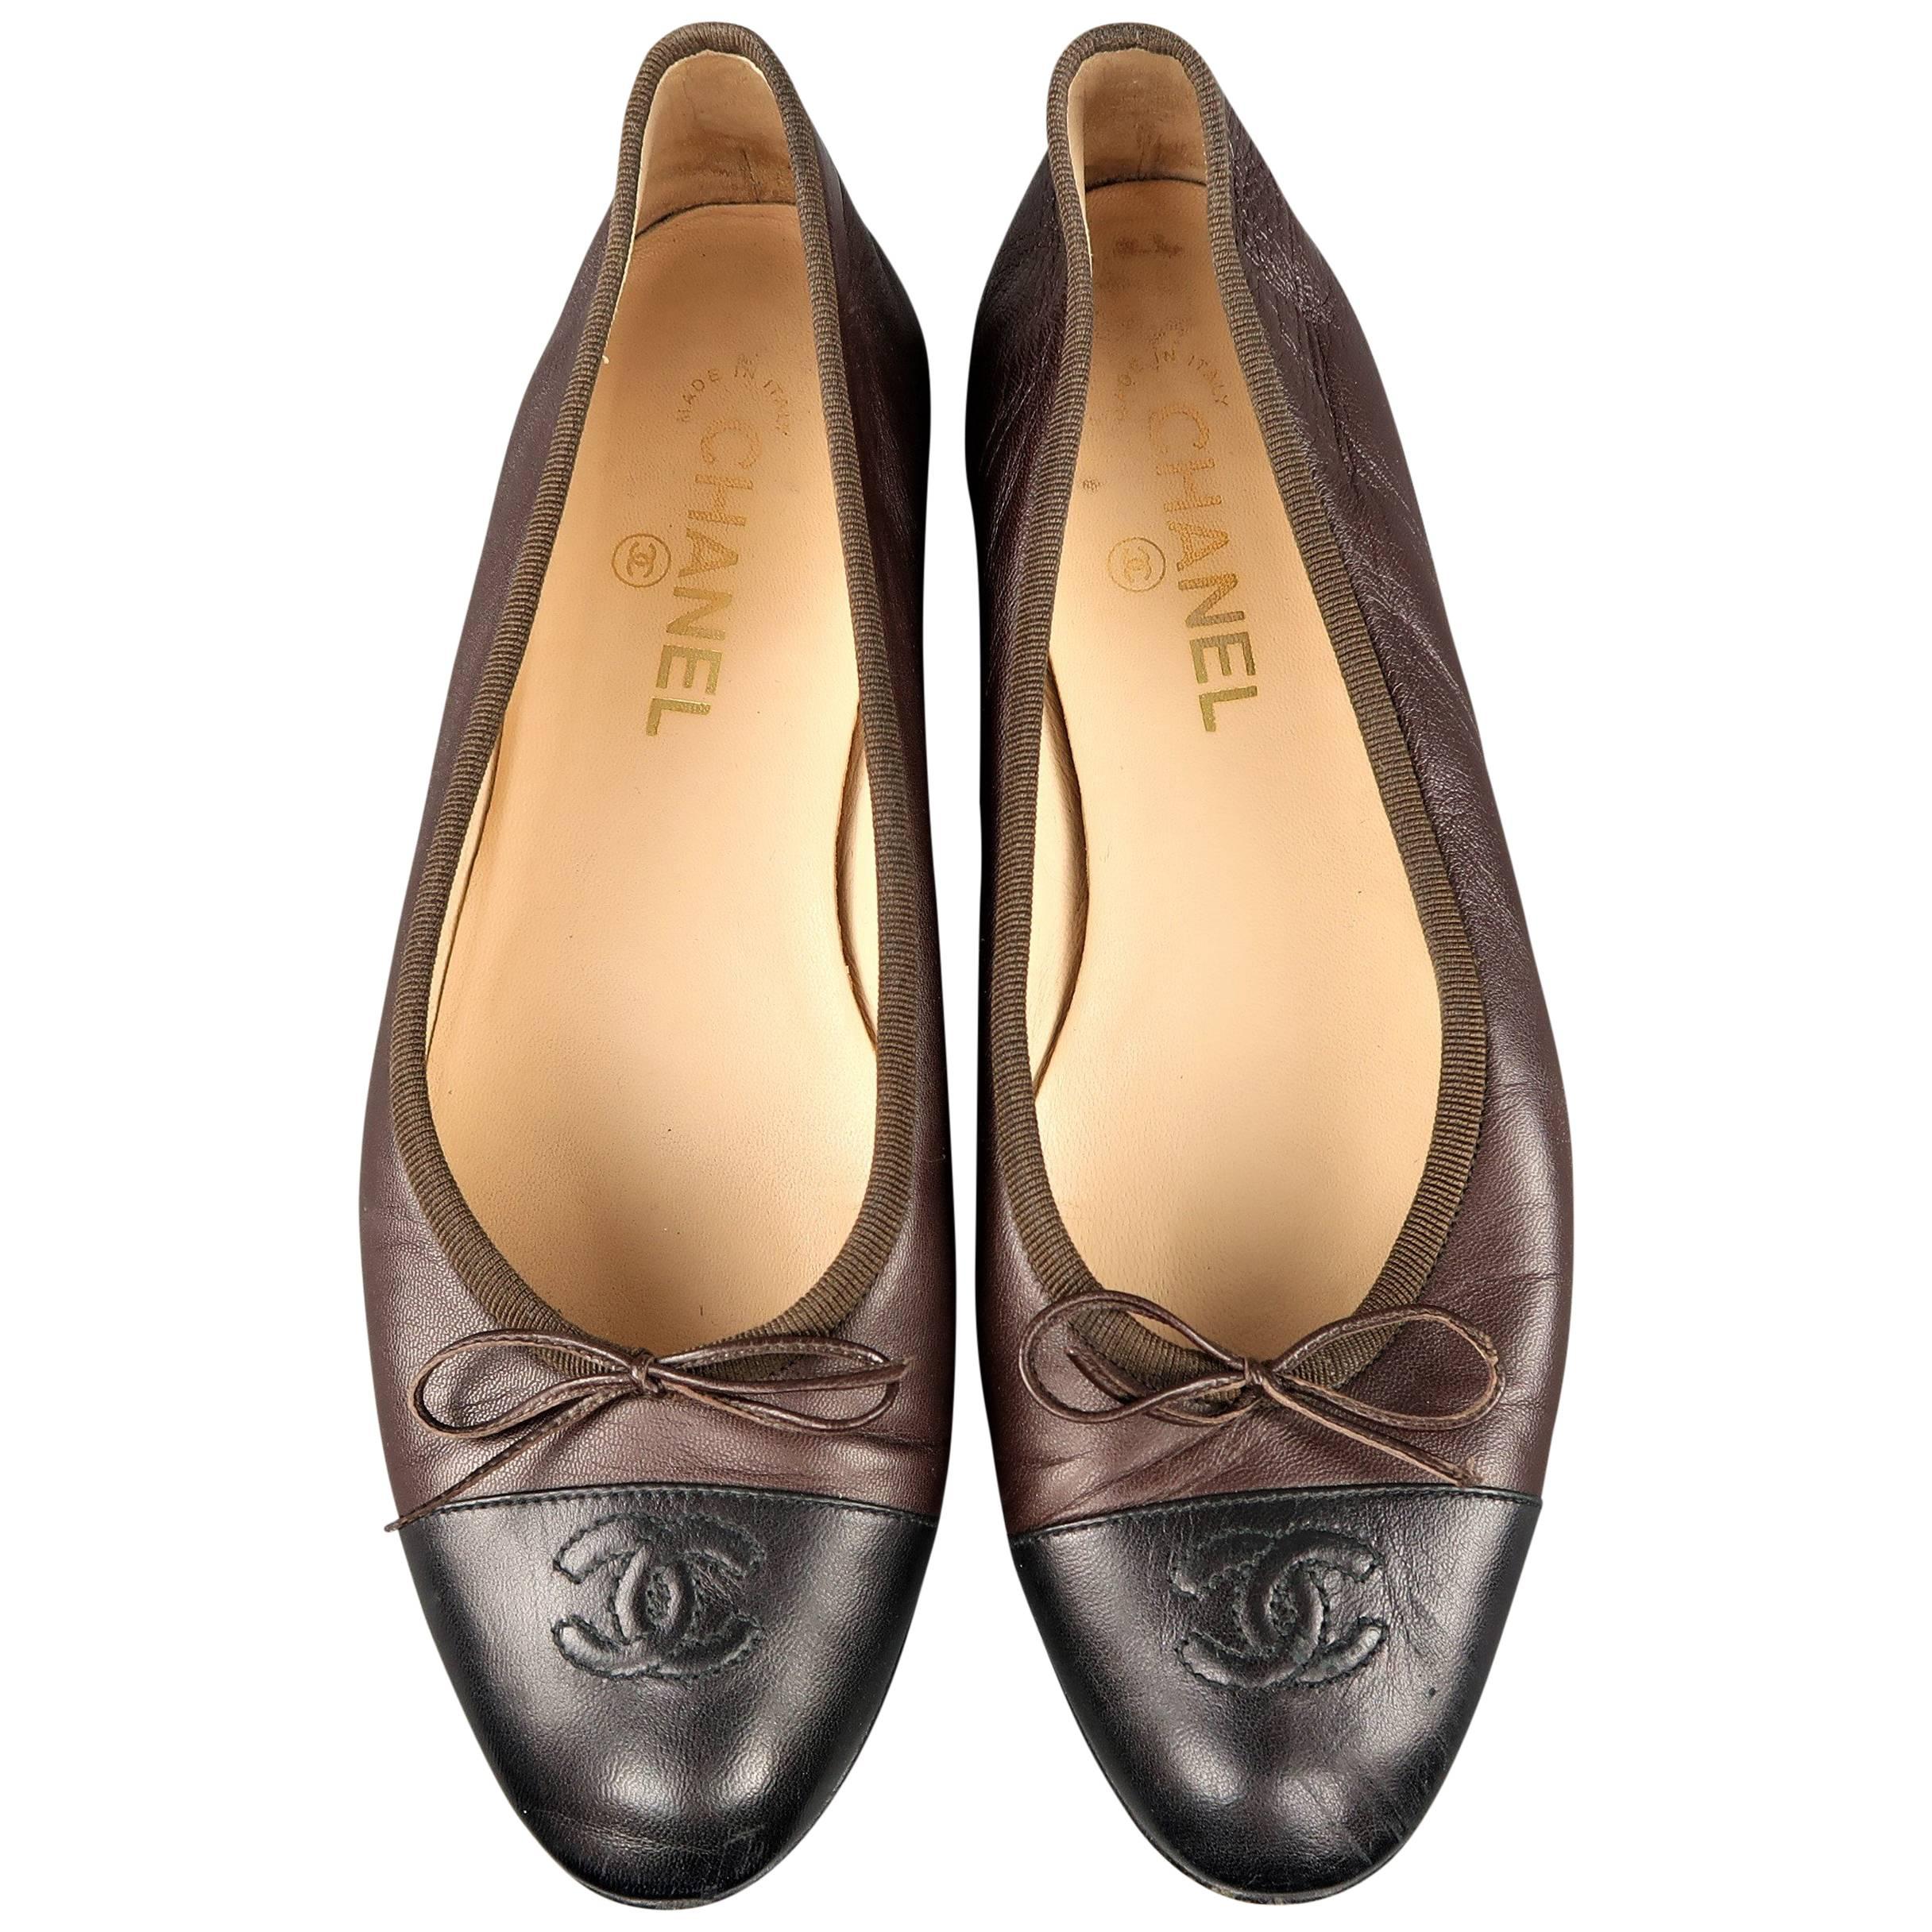 CHANEL Flats Size 10.5 Brown and Black Leather CC Cap Toe Ballet